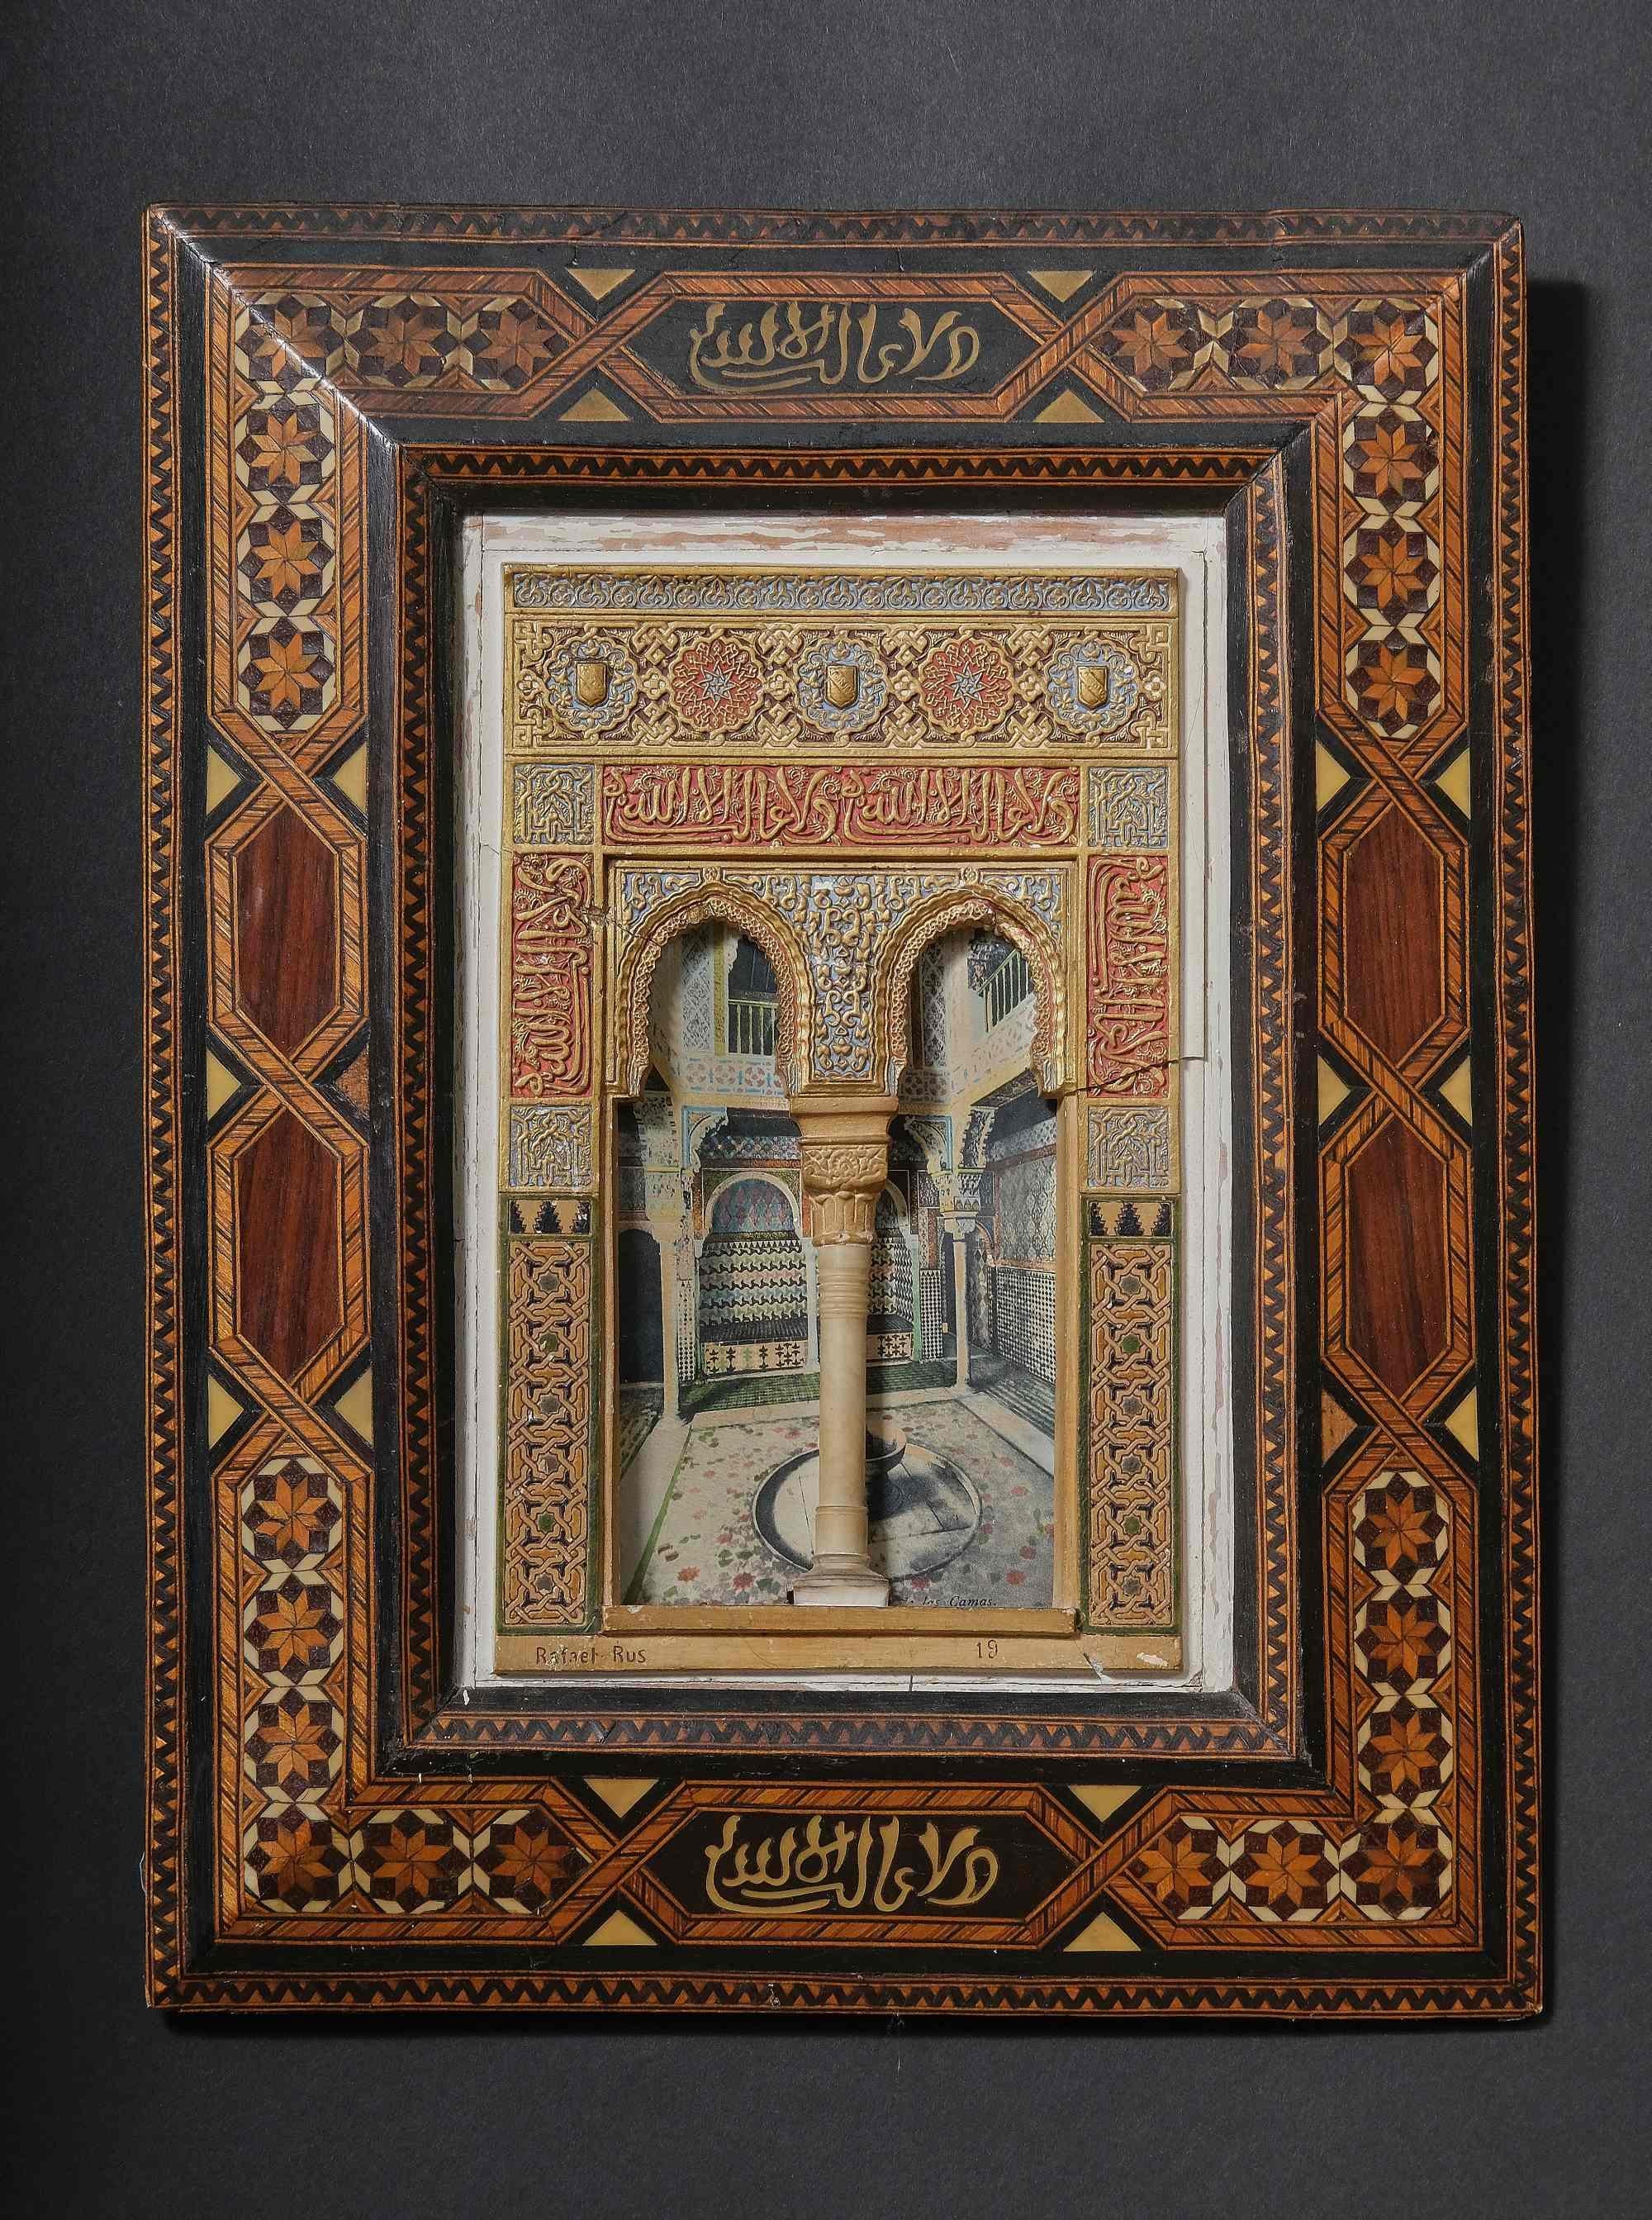 A pair of Alhambra facade model Plates in beautiful Arabic style frame. Signed 